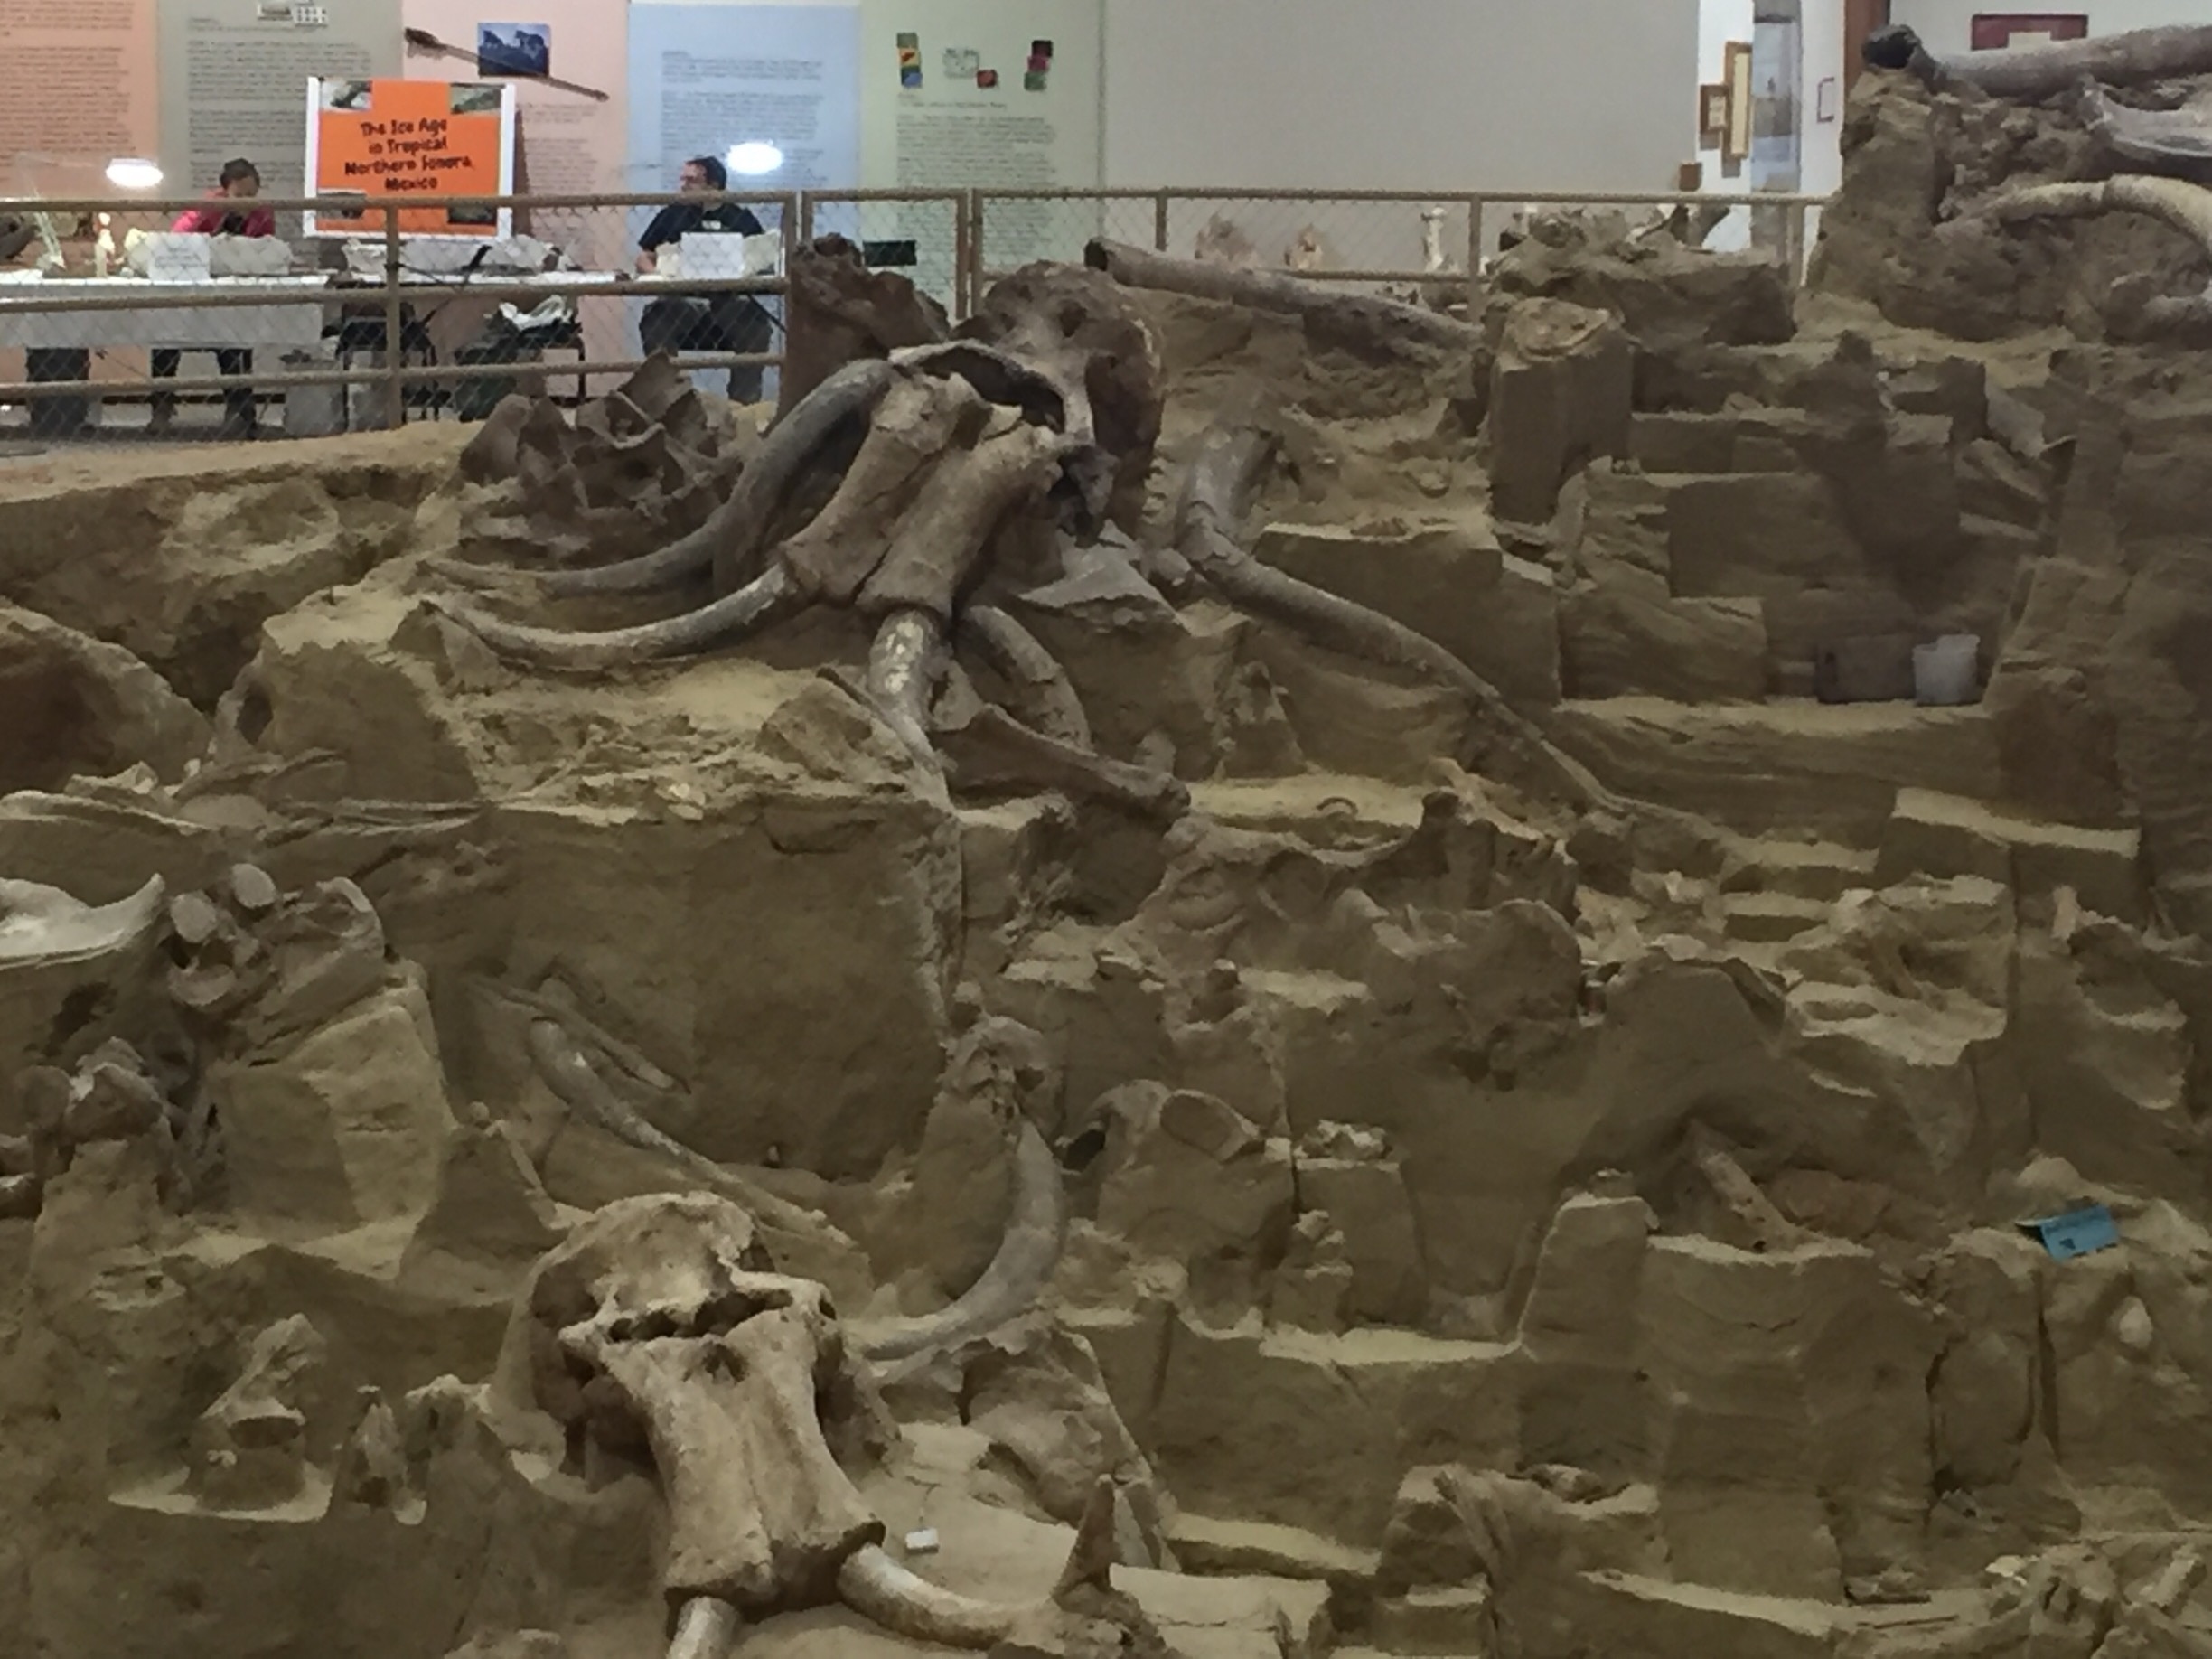 I really enjoyed the Mammoth site tour!  Well worth the 10bucks!